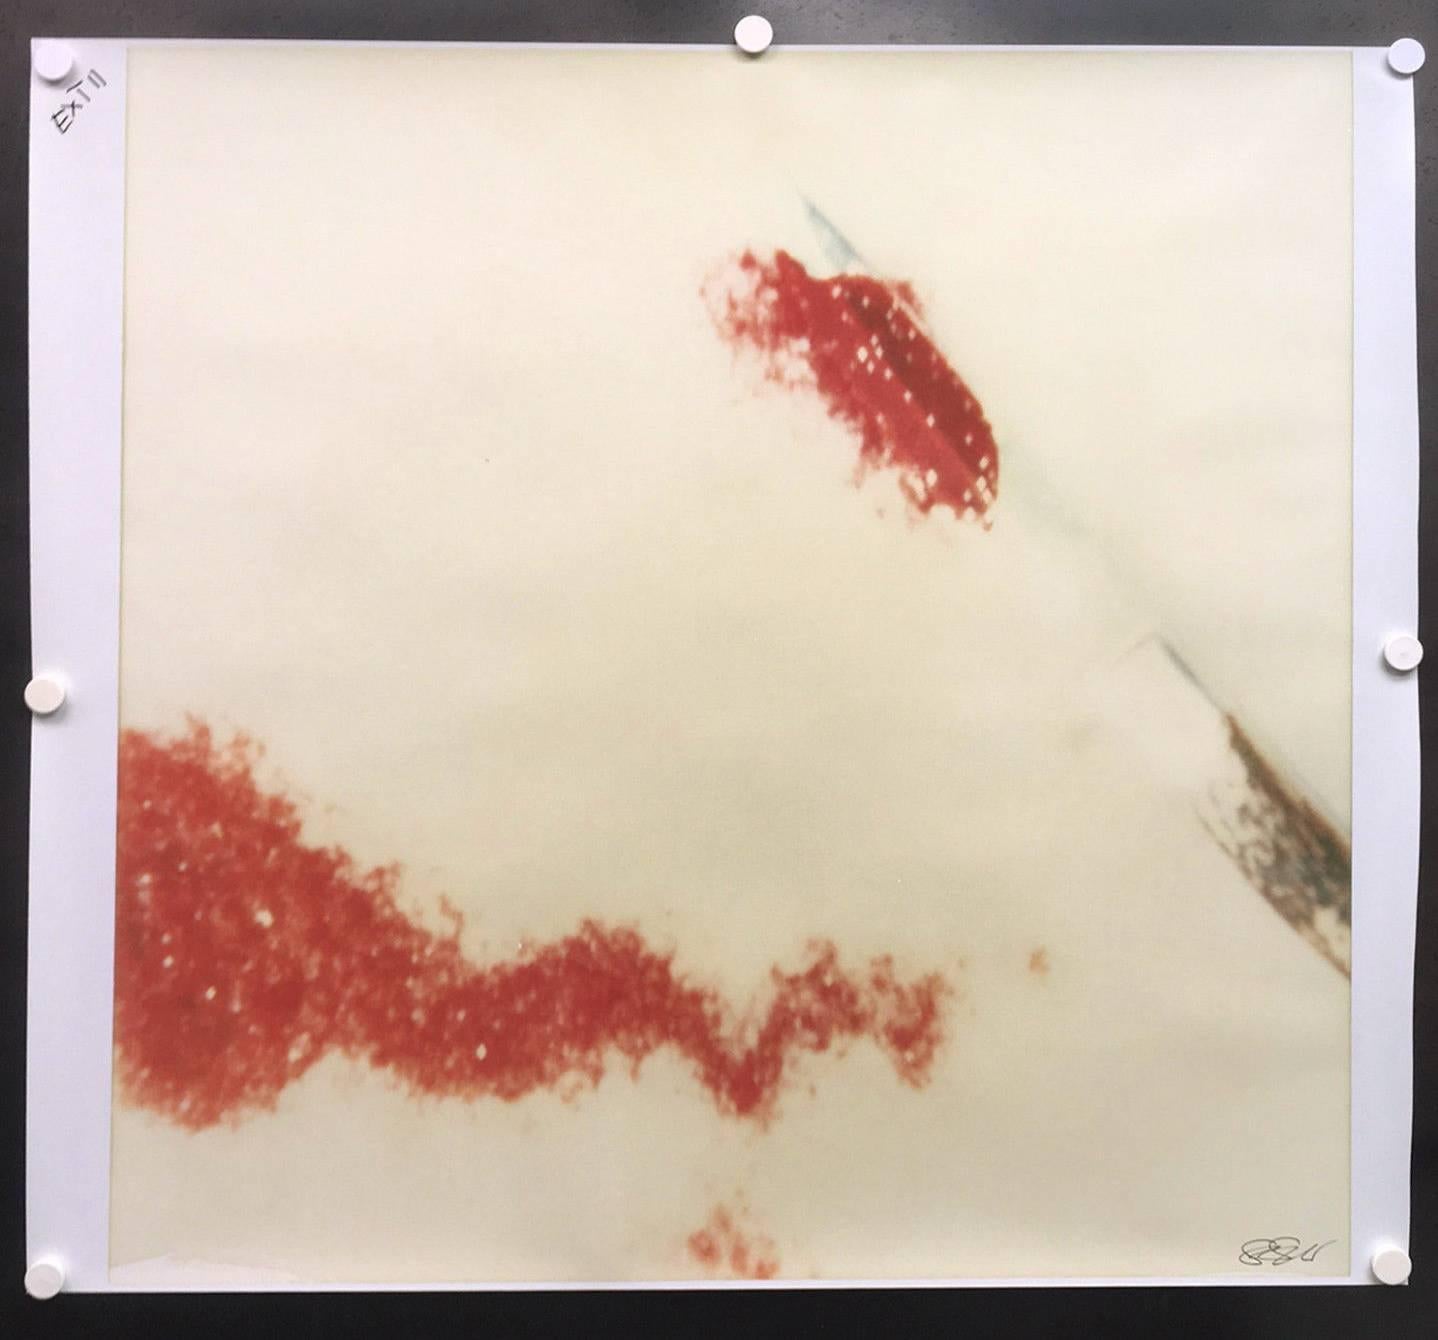 Stefanie Schneider Color Photograph - Traces from the series Frozen - based on a Polaroid Original - Proof 